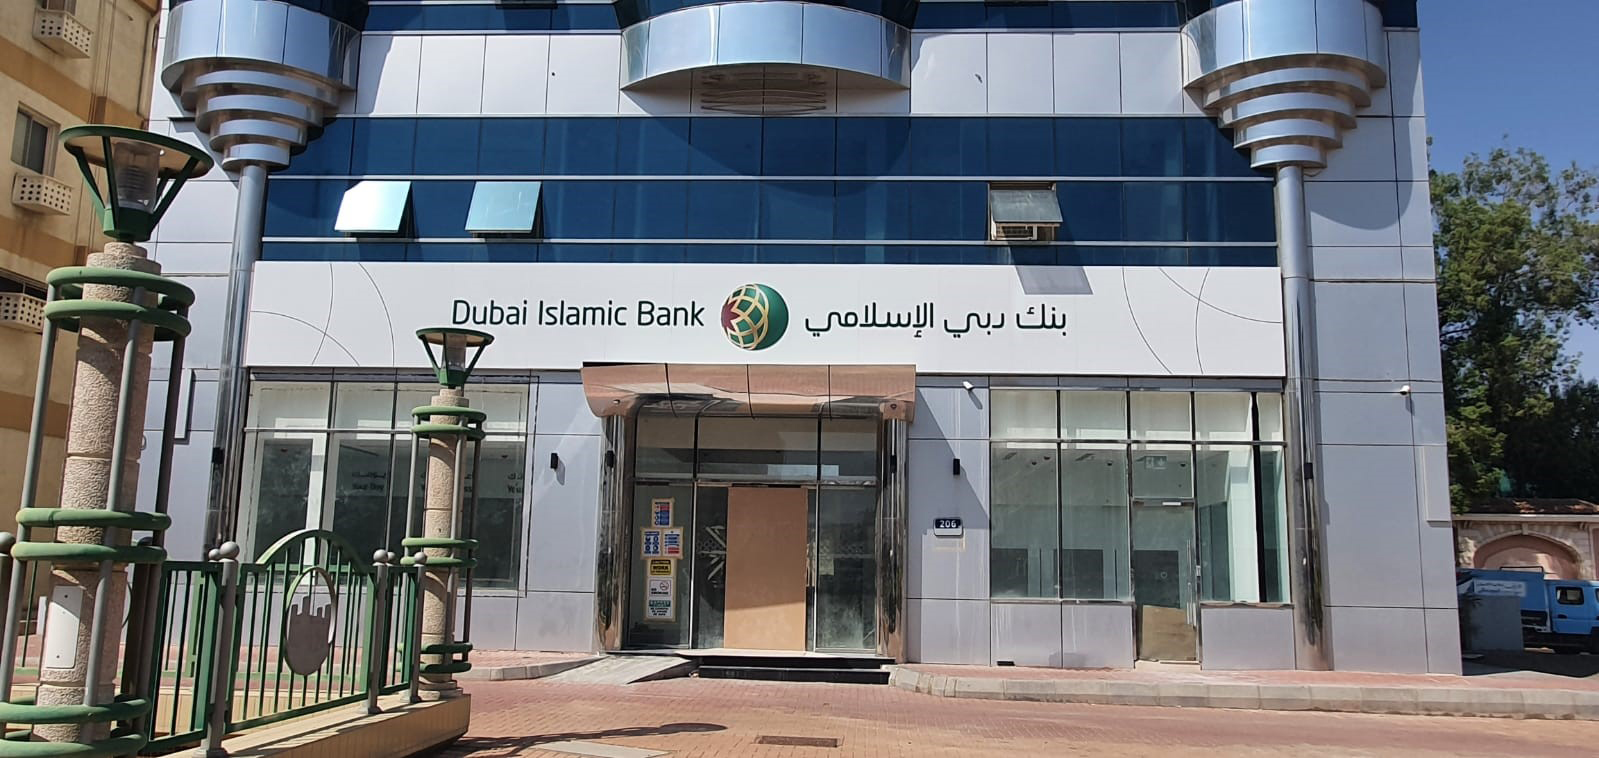 Bank & Financial Sector Signages  